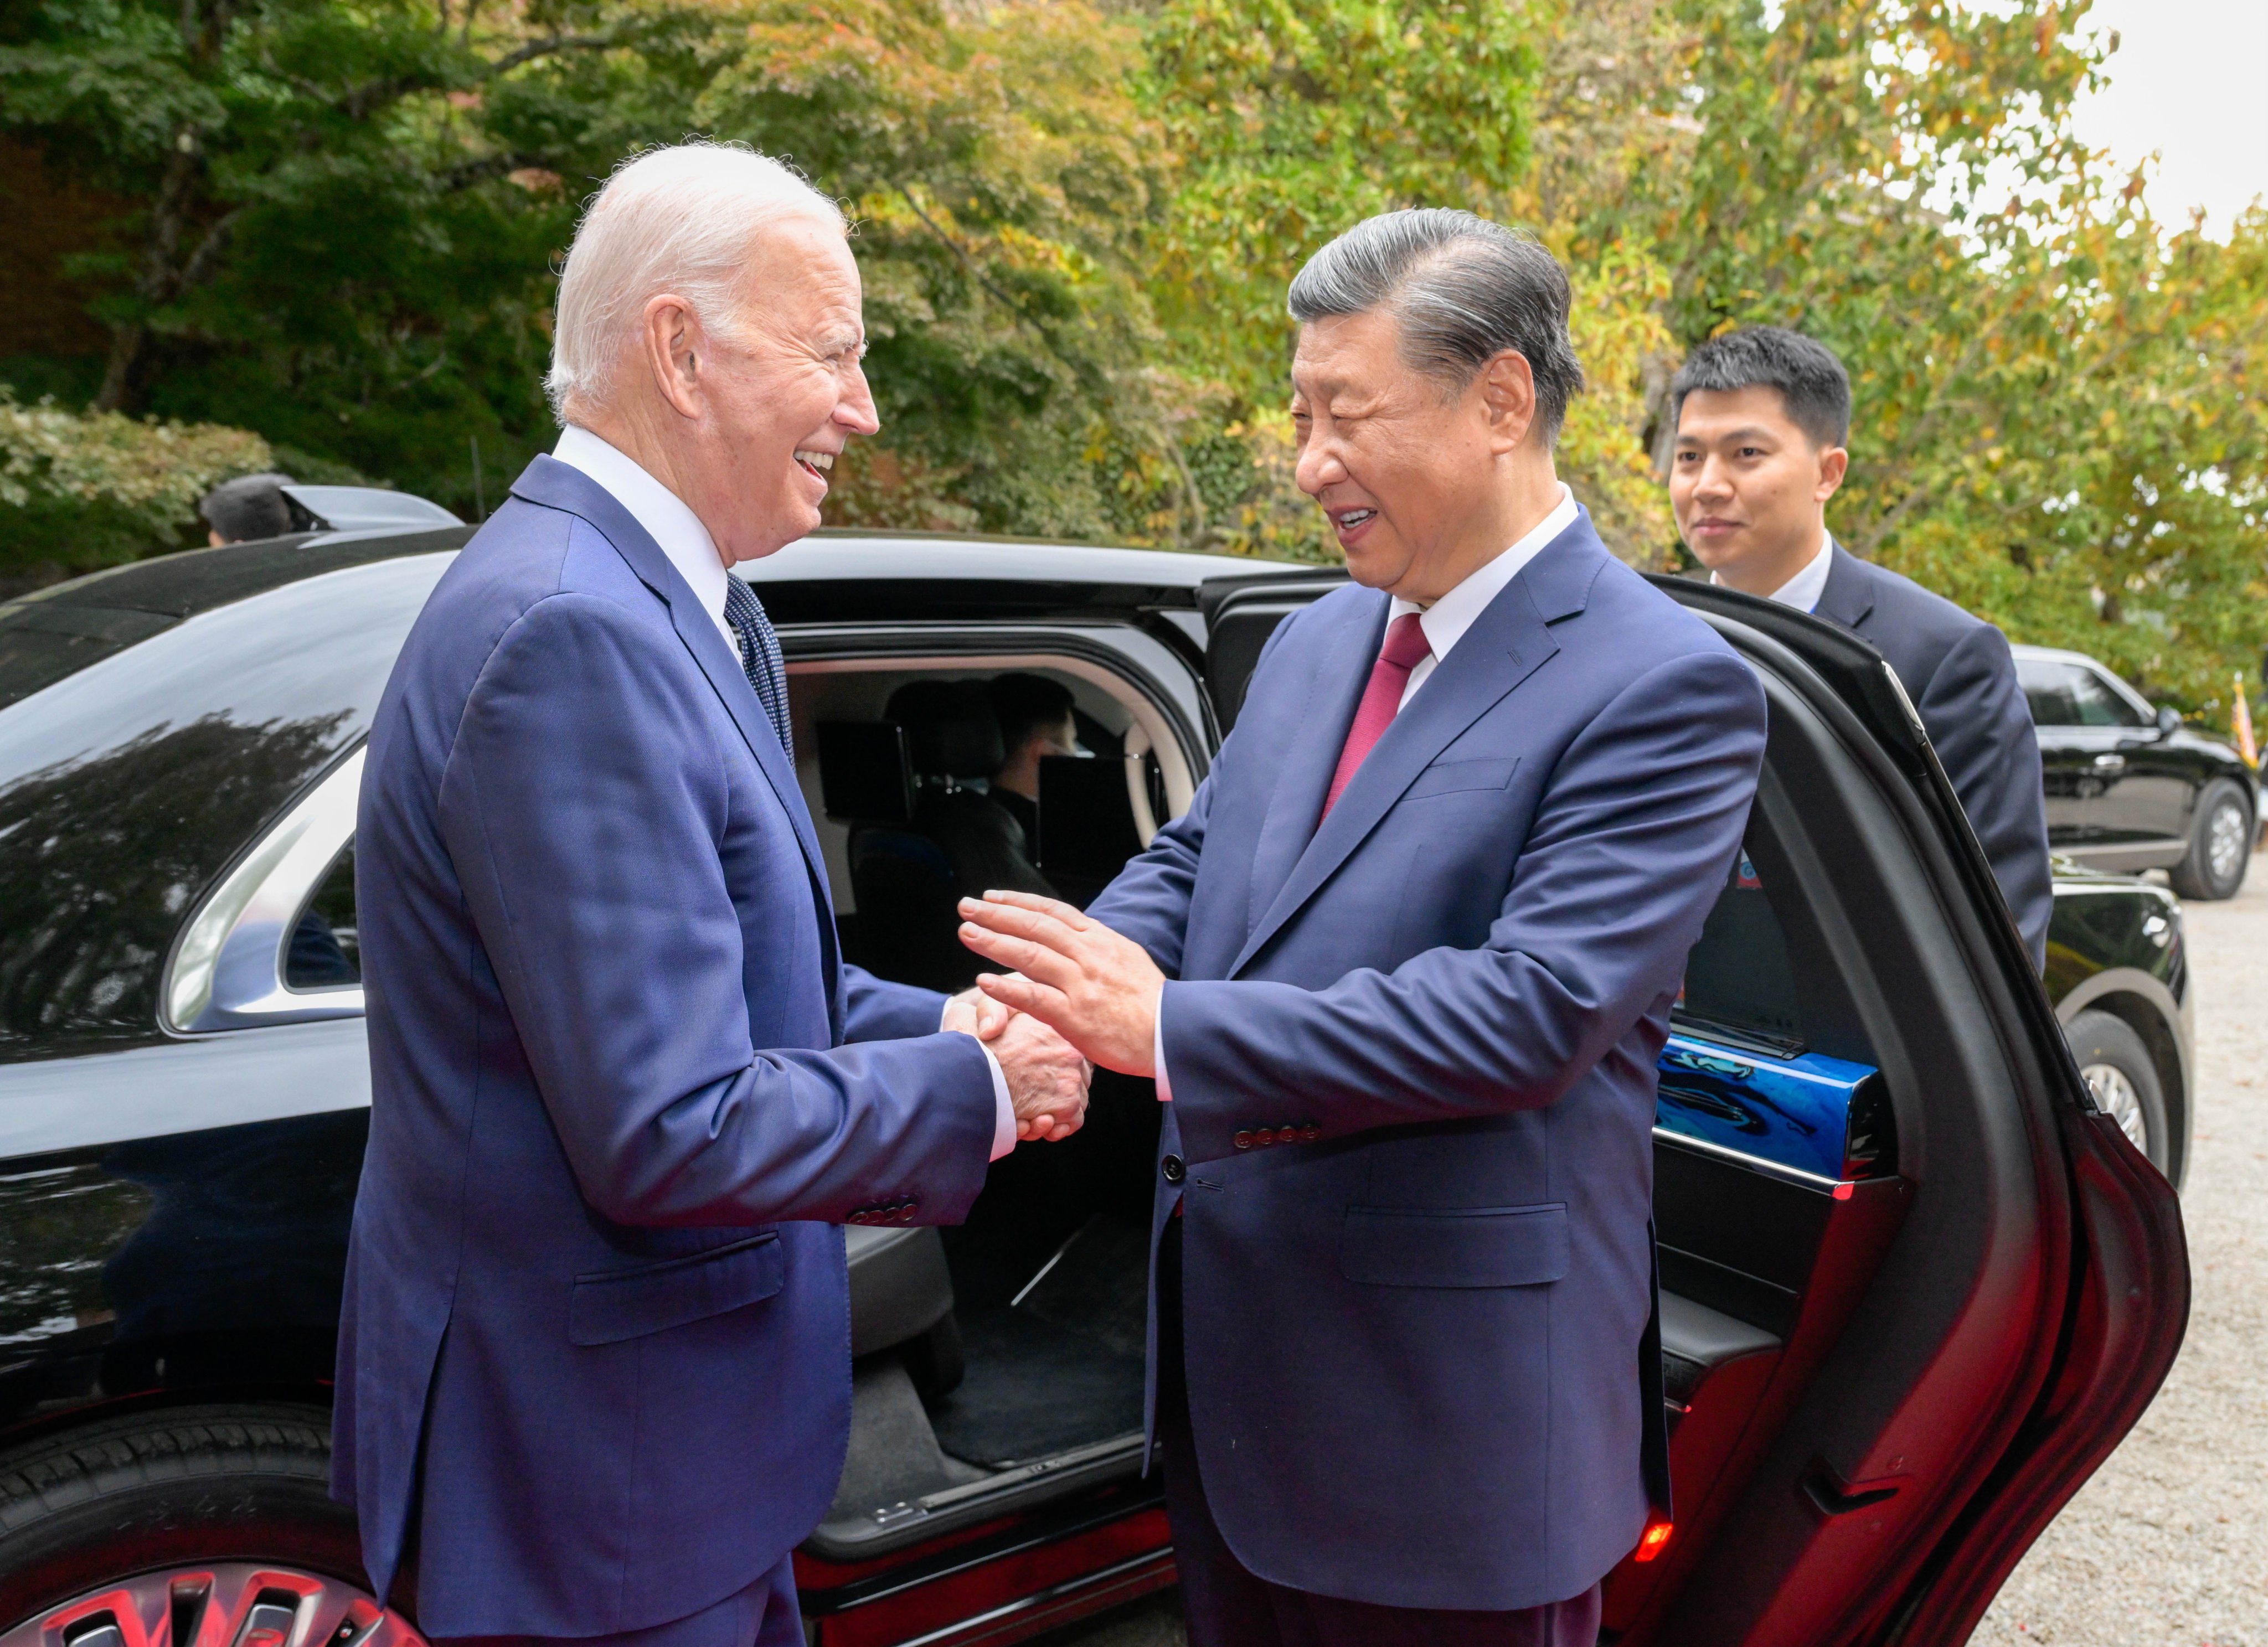 In this week’s issue of the Global Impact newsletter, we look to the future of the US-China relationship following the meeting between presidents Xi Jinping and Joe Biden in November. Photo: Xinhua